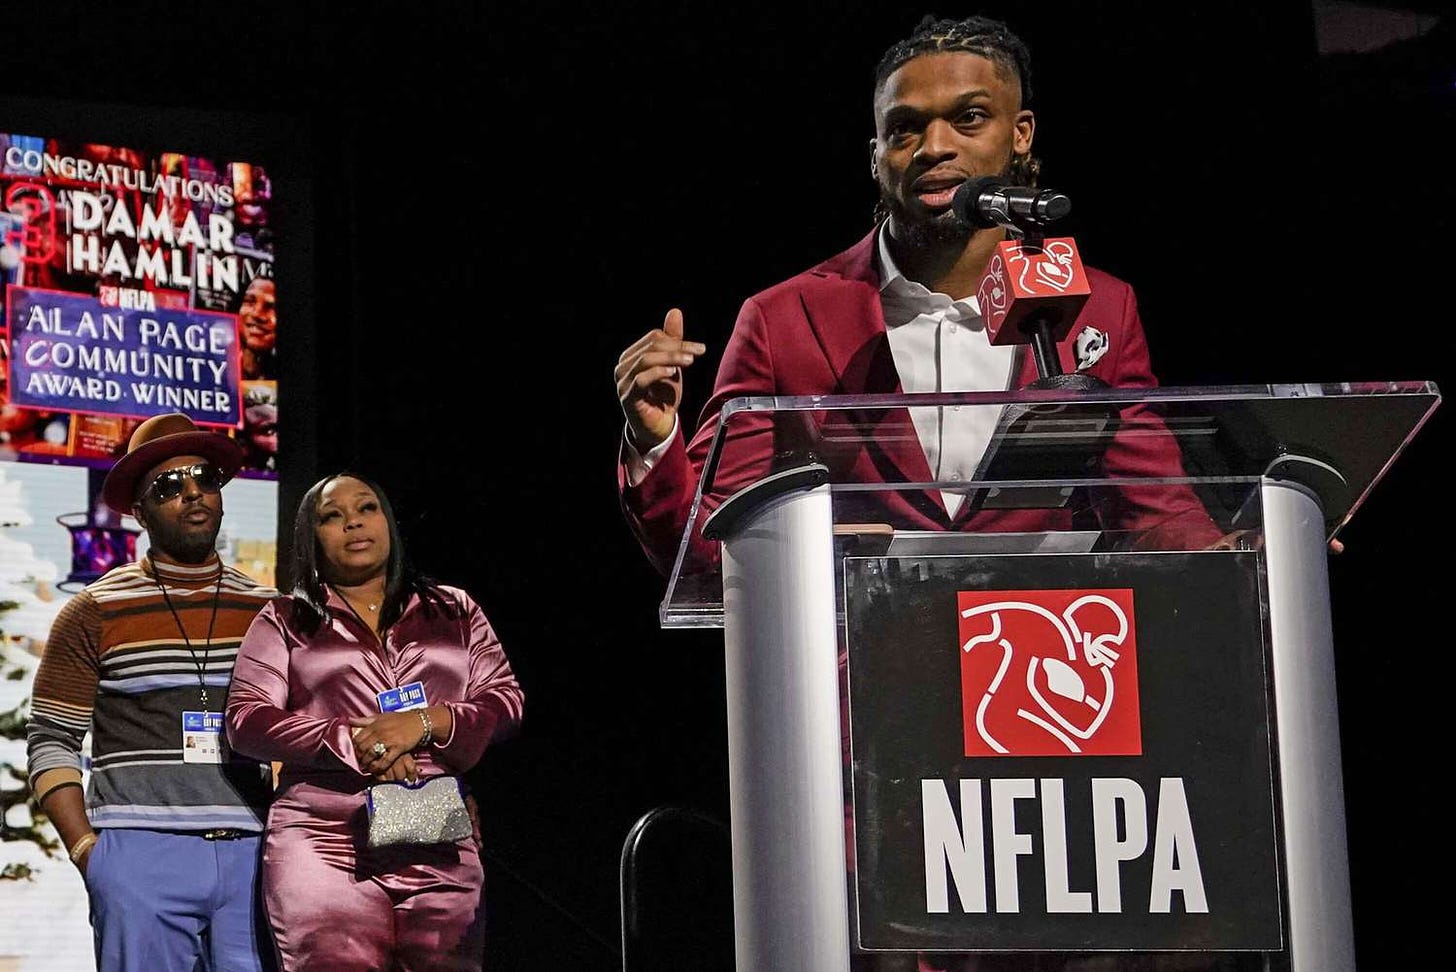 Damar Hamlin Makes First Public Speaking Appearance to Accept Charity Award